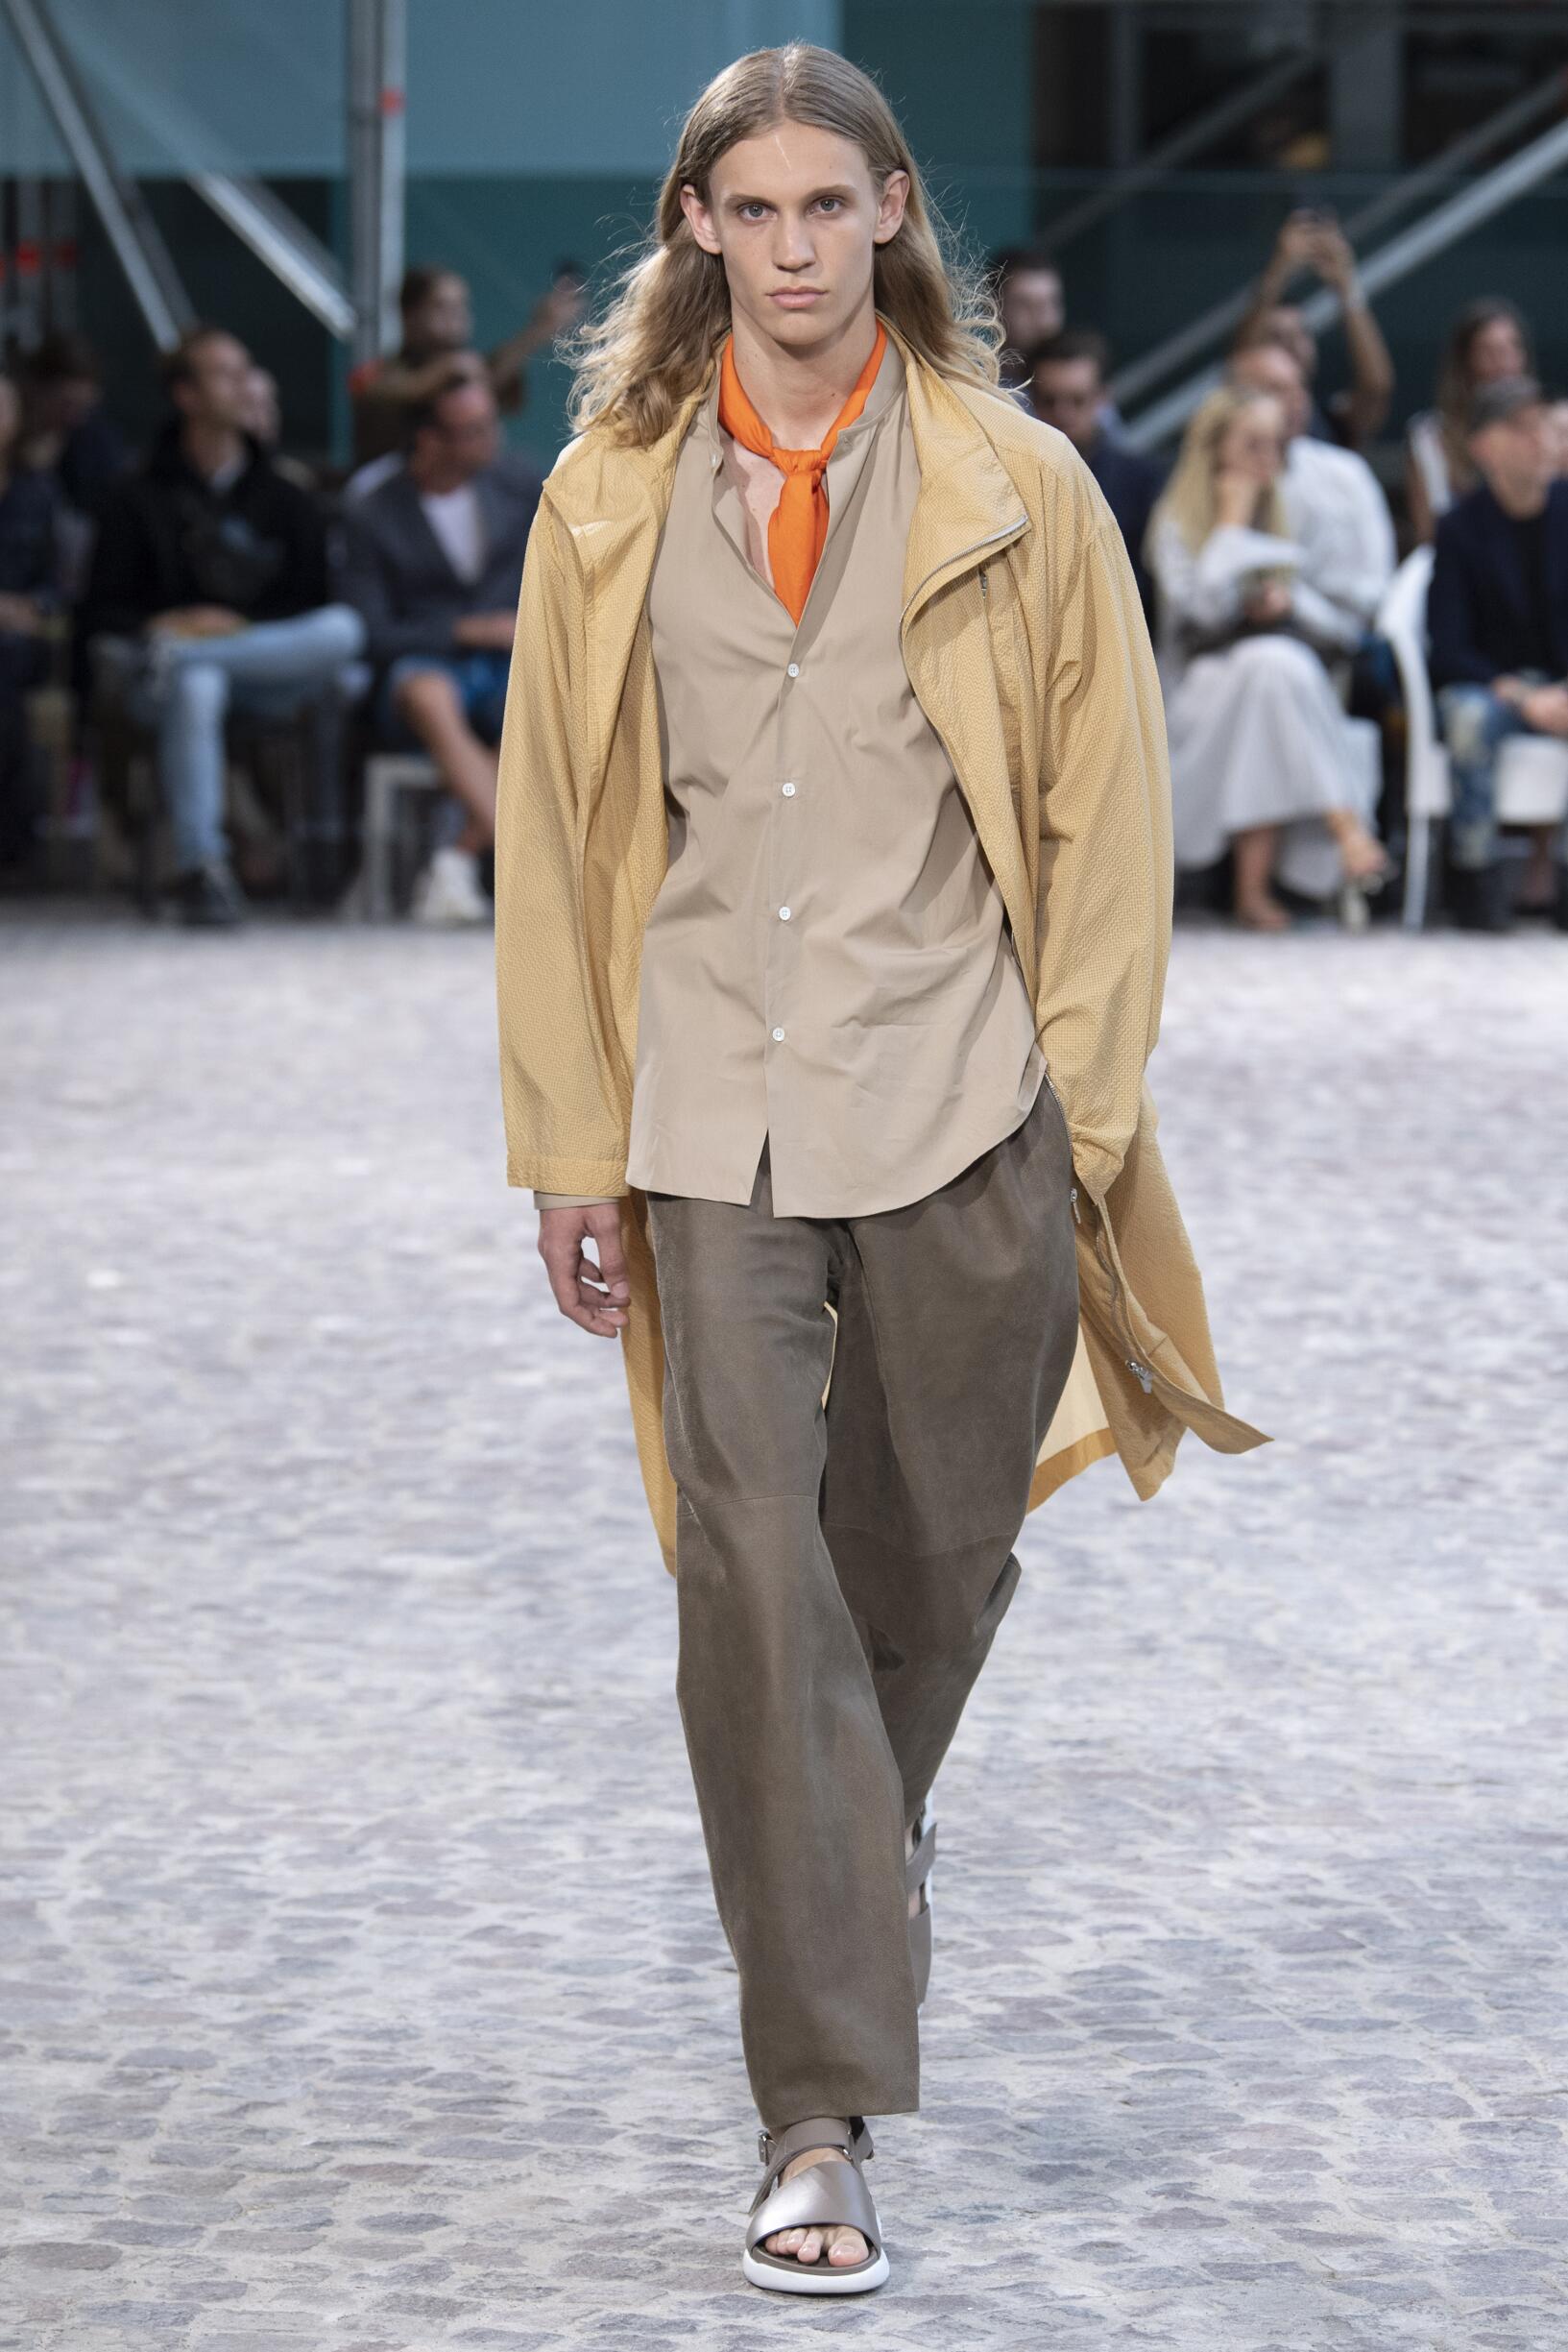 HERMÈS SPRING SUMMER 2020 MEN’S COLLECTION | The Skinny Beep